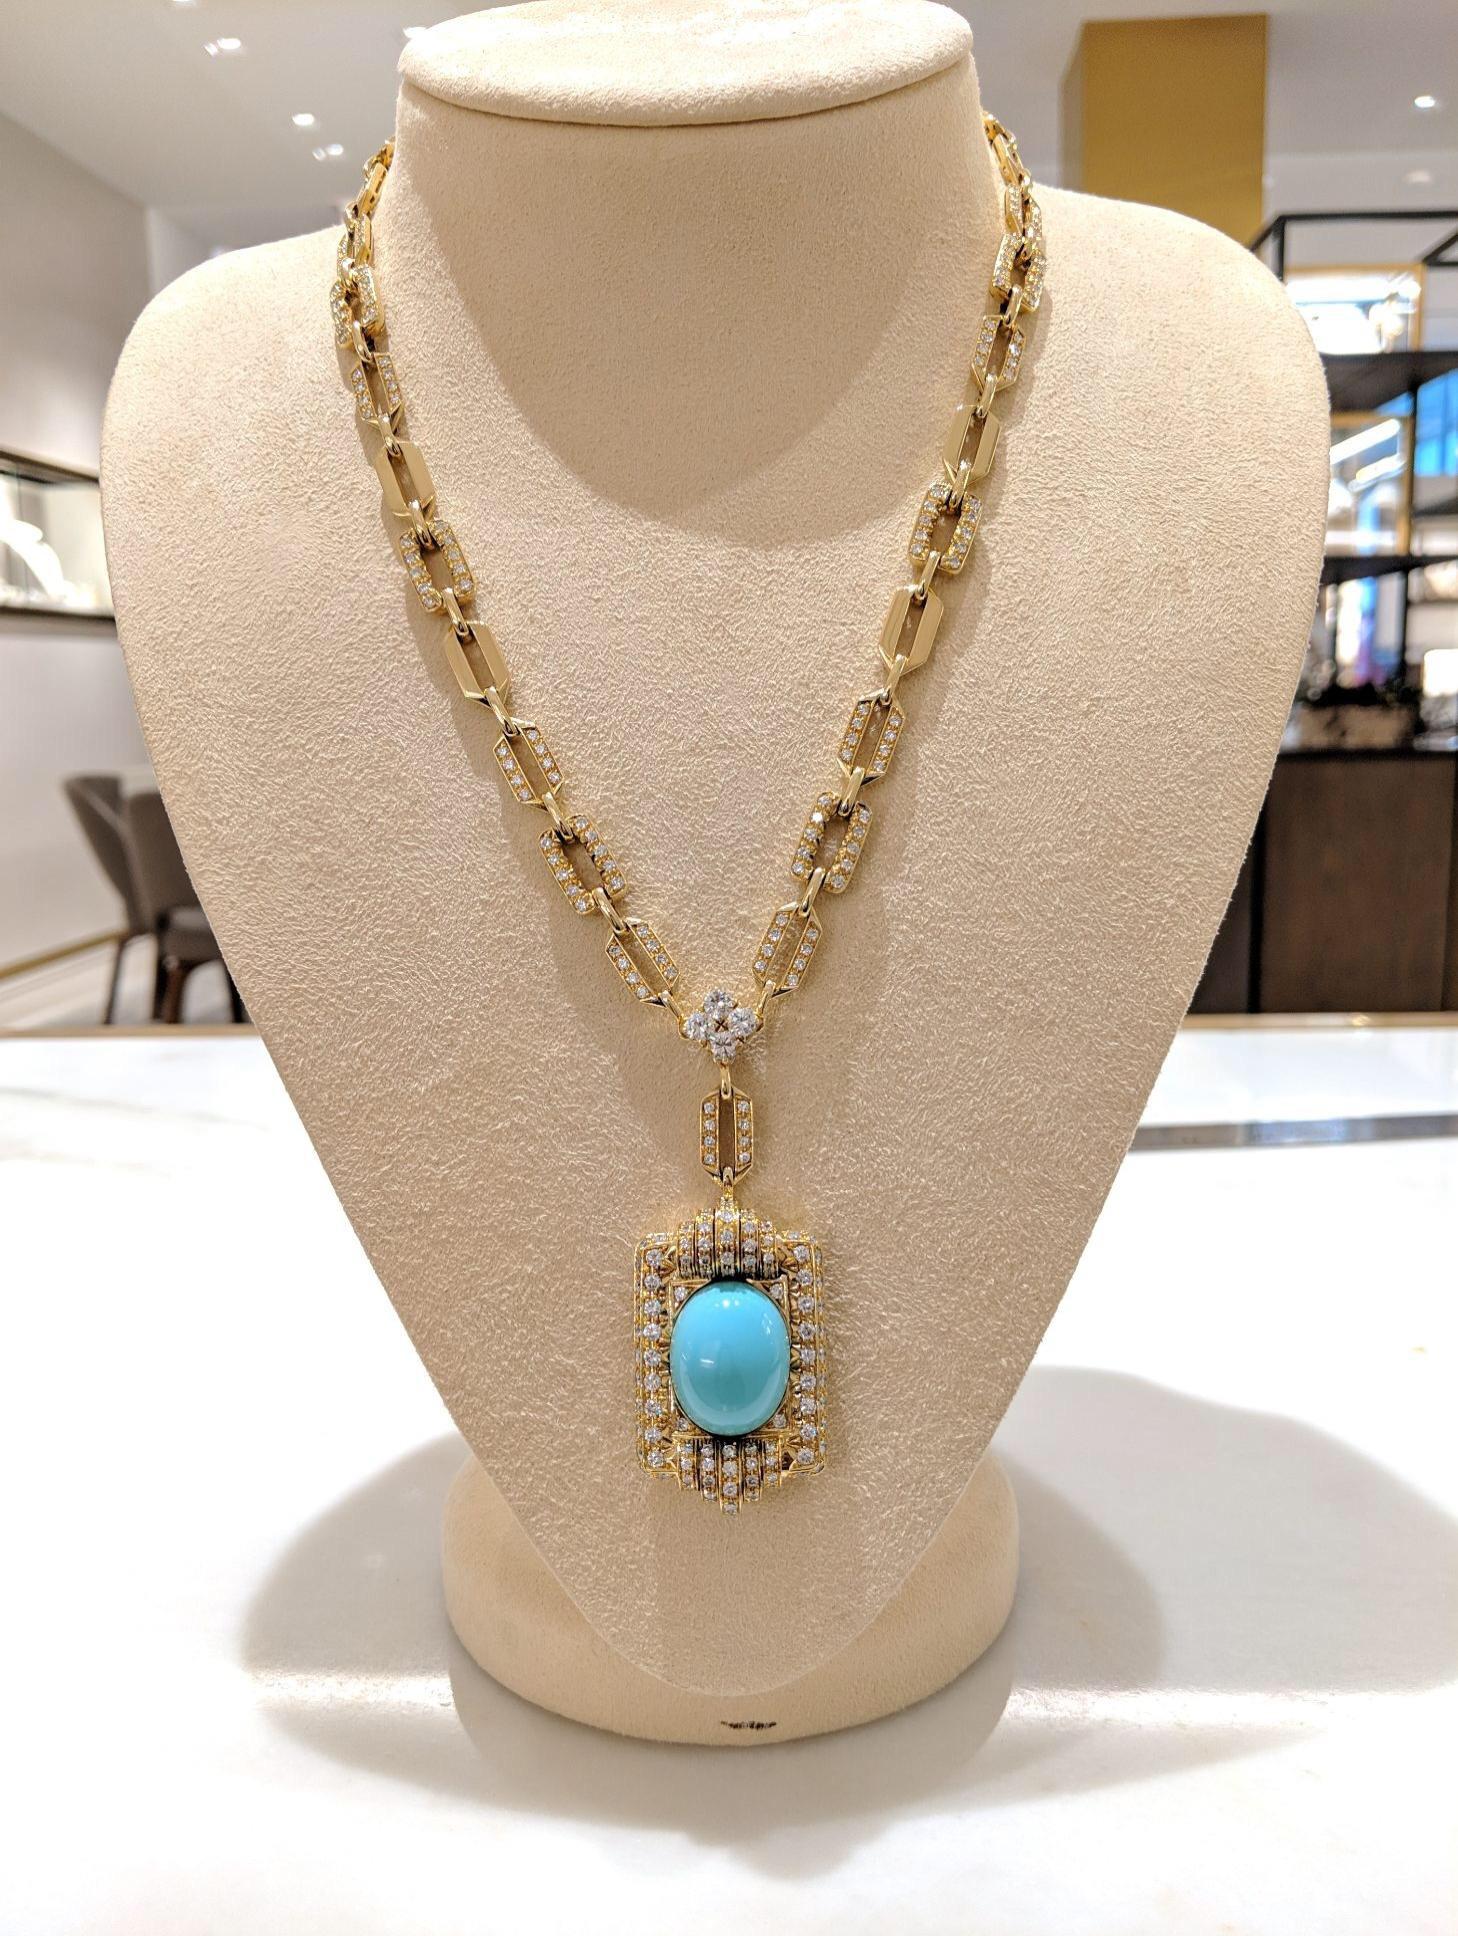 Women's or Men's Vintage 18Kt Gold, 9.42ct. Diamond Necklace with a 21.02ct Persian Turquoise